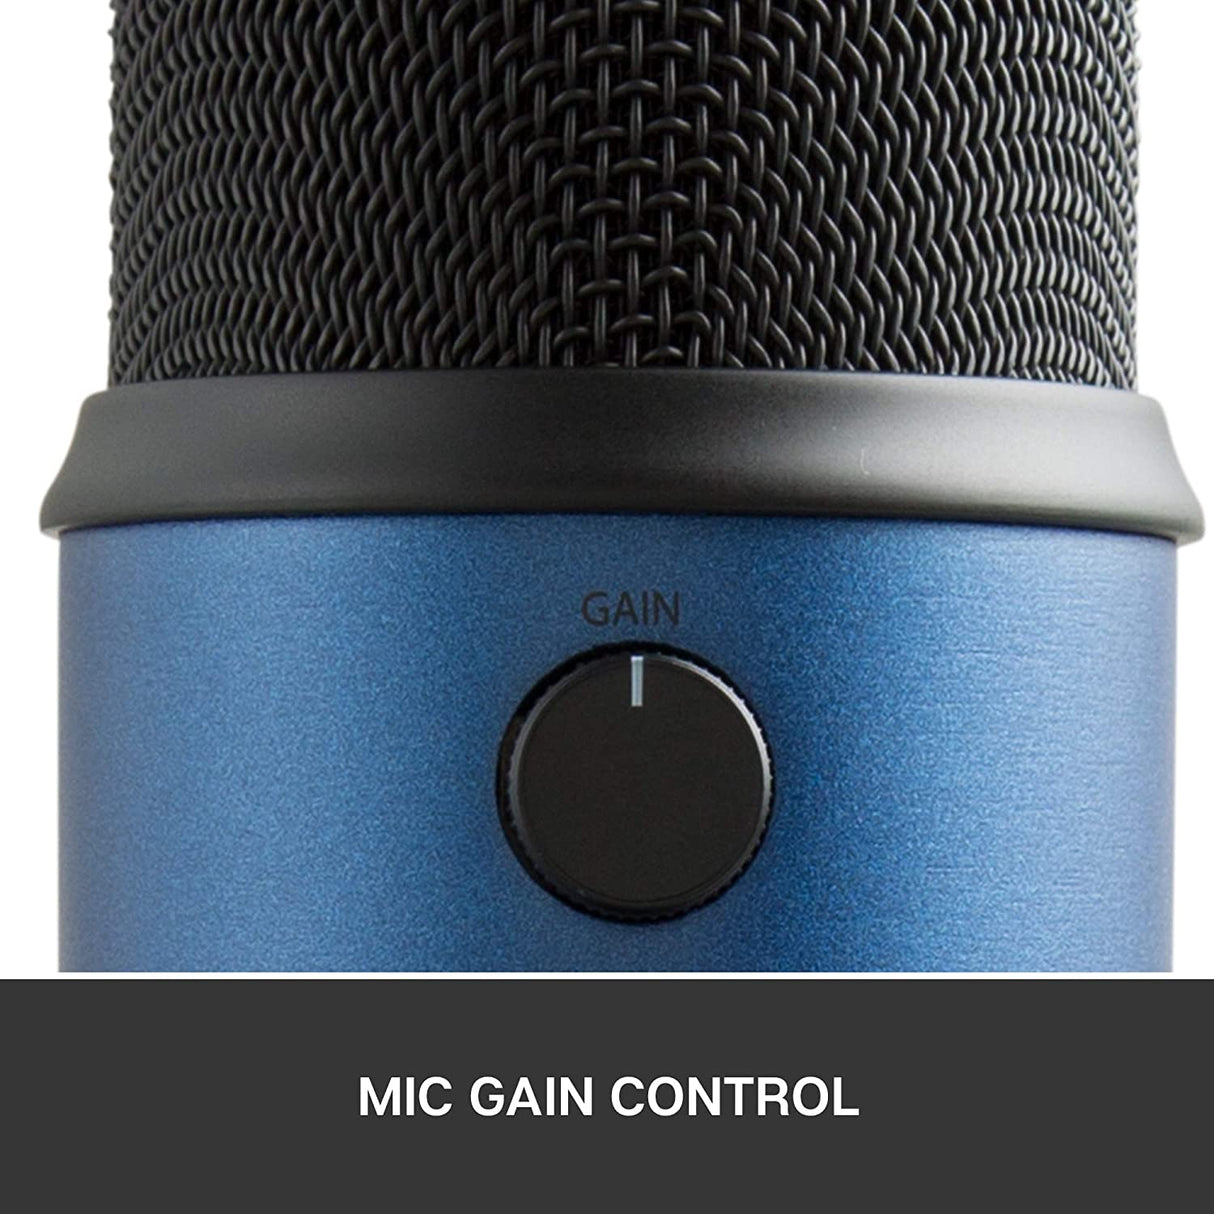 Blue Yeti USB Microphone for PC, Mac, Gaming, Recording, Streaming,  Podcasting, Studio and Computer Condenser Mic with Blue VO!CE effects, 4  Pickup